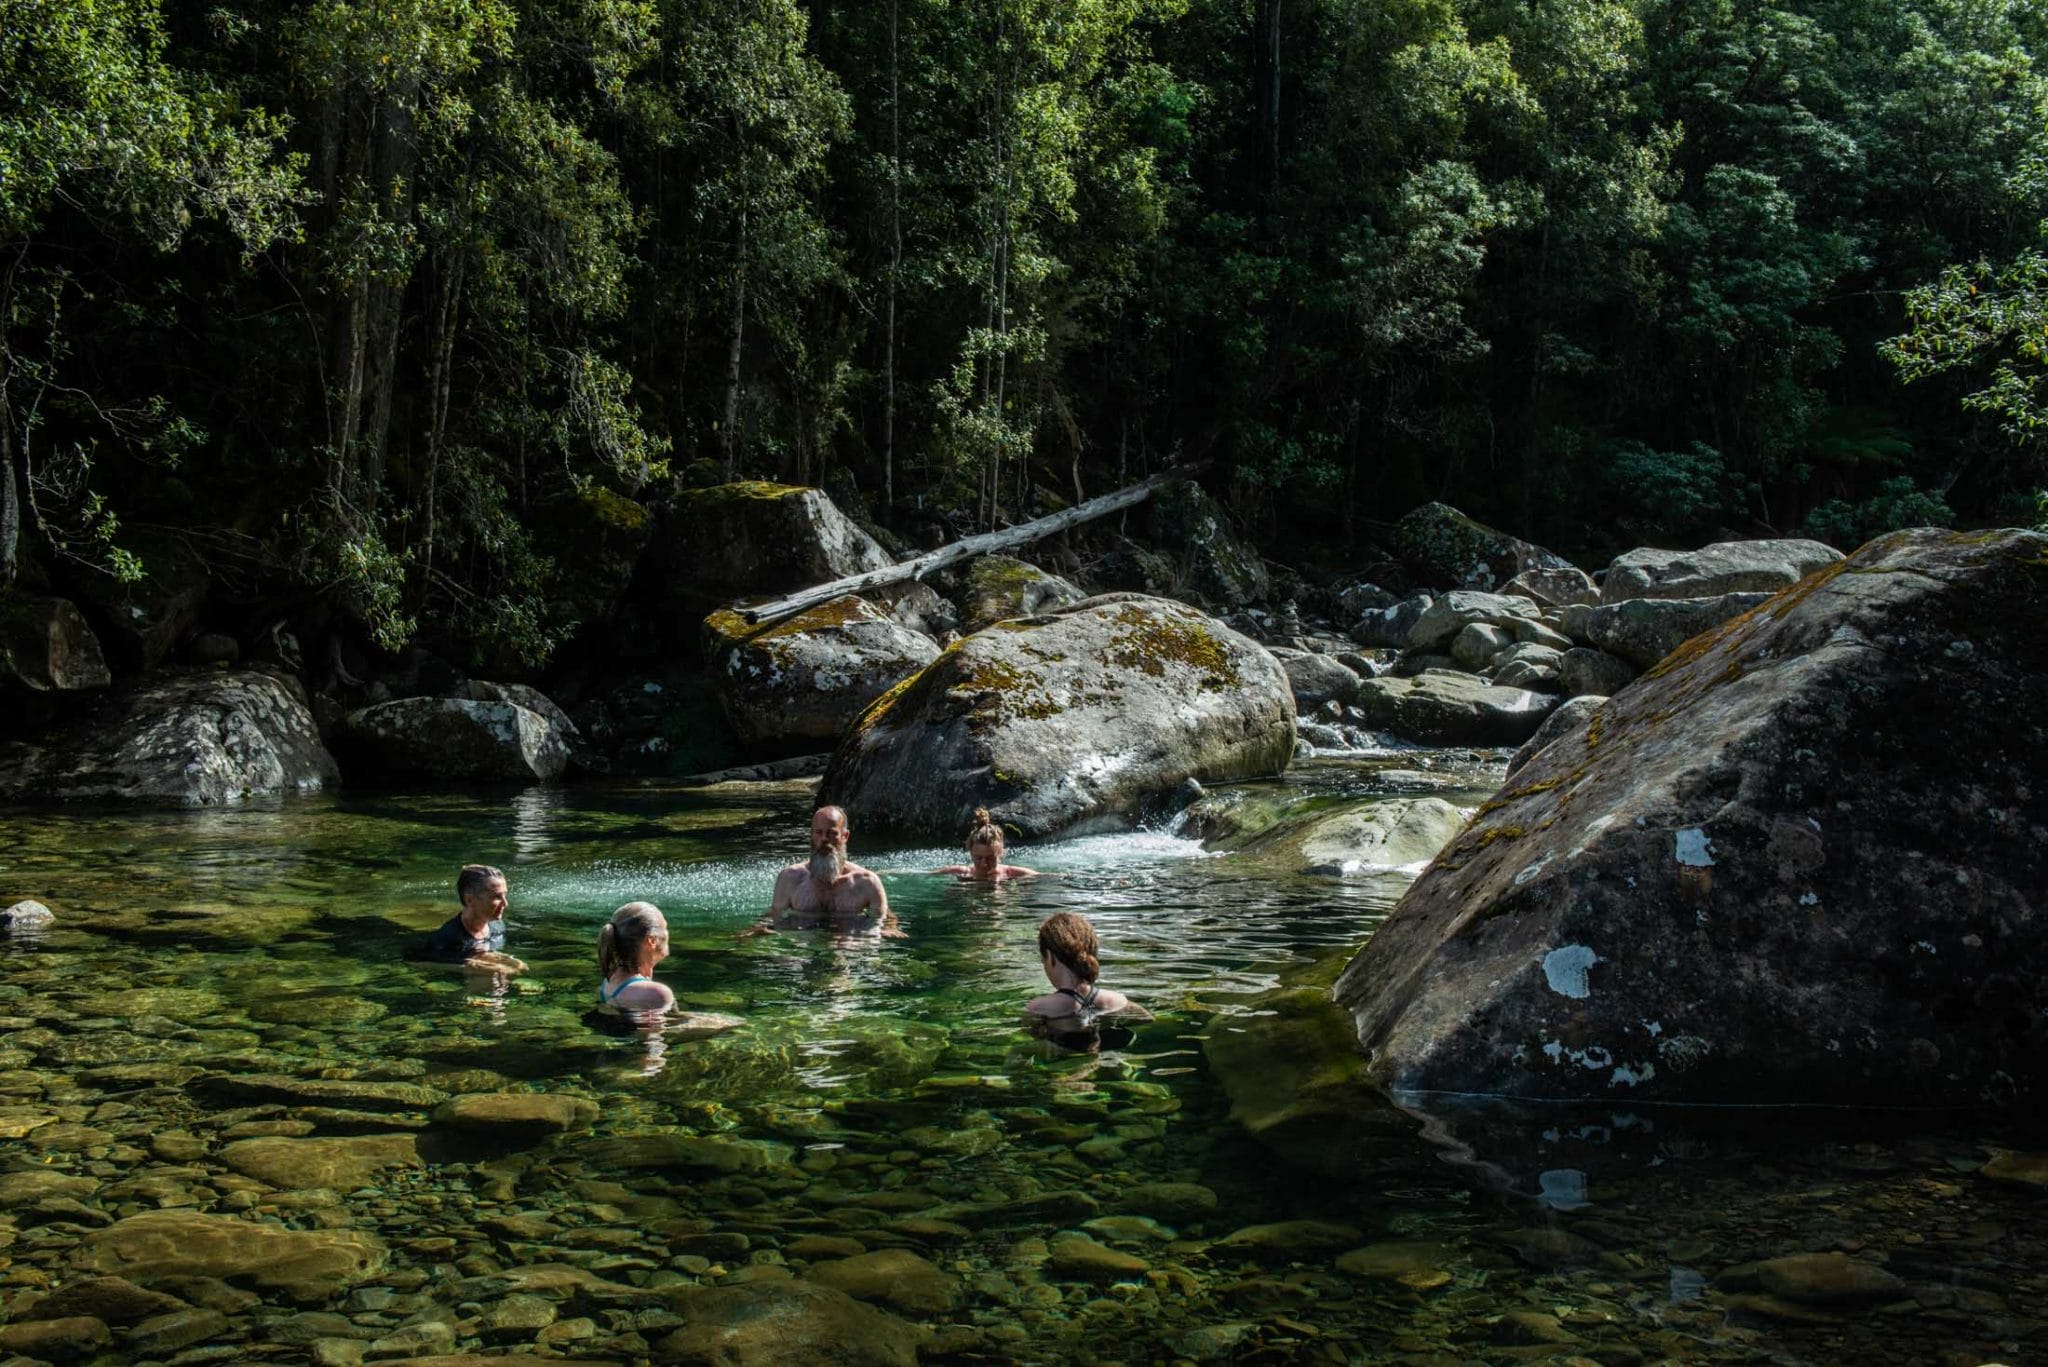 A group of people swimming in a river in a forest, capturing the essence of Tasmania's natural beauty.